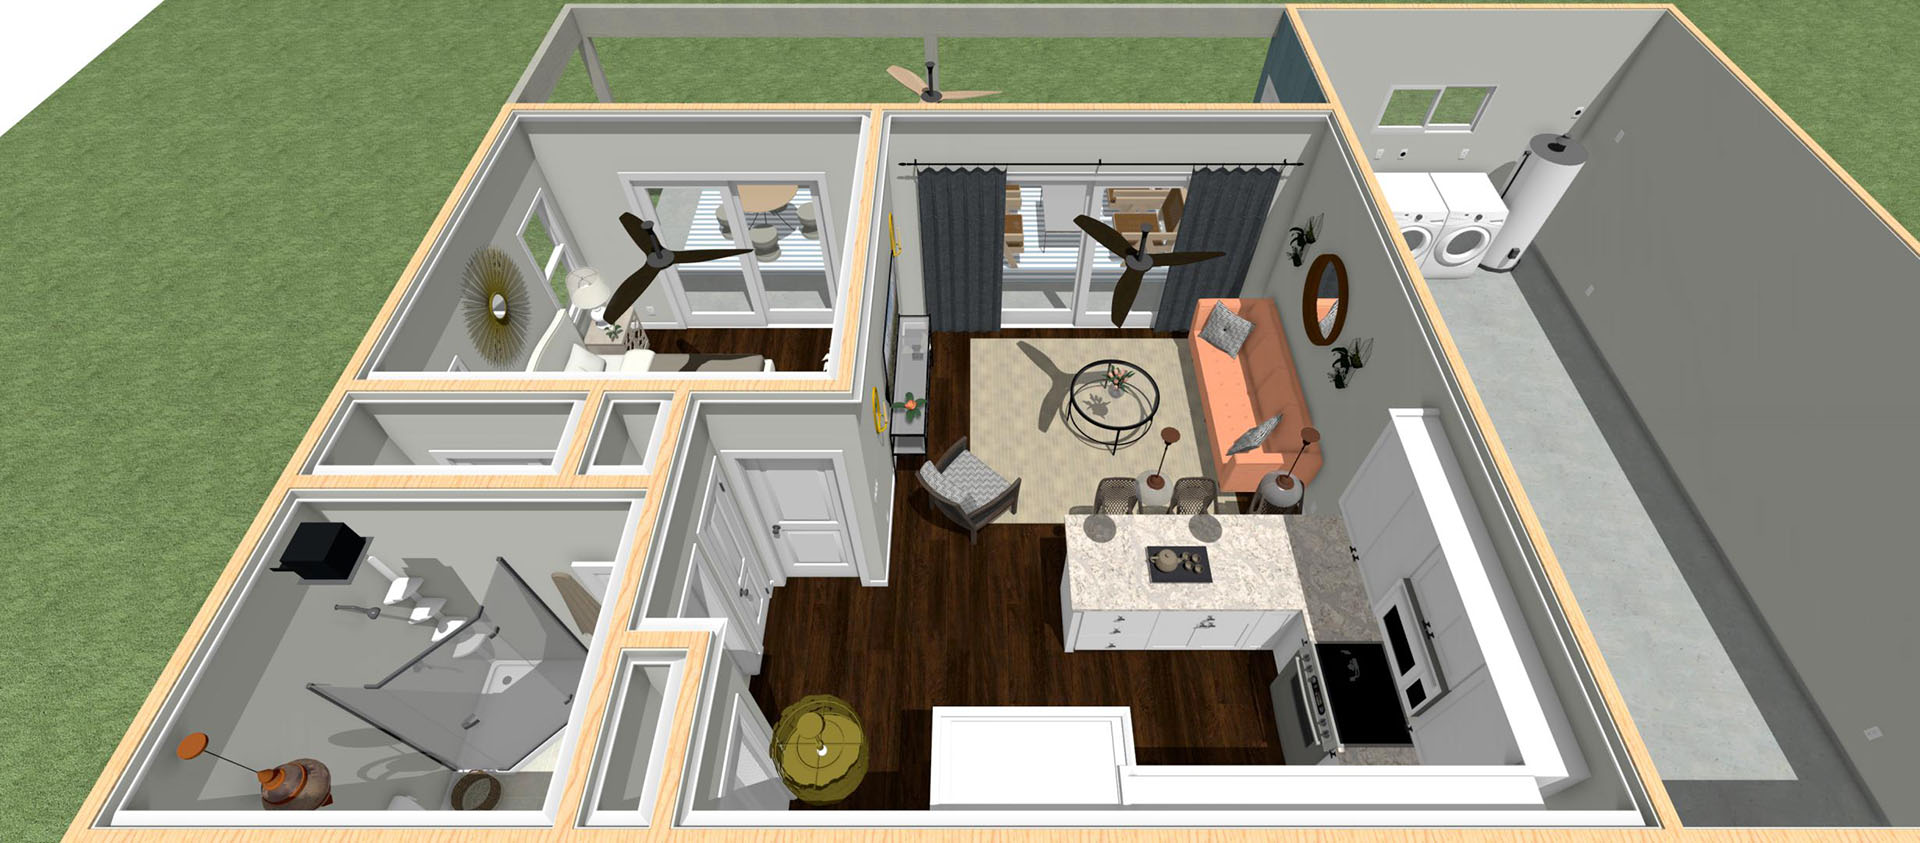 Aerial view of a three bedroom house